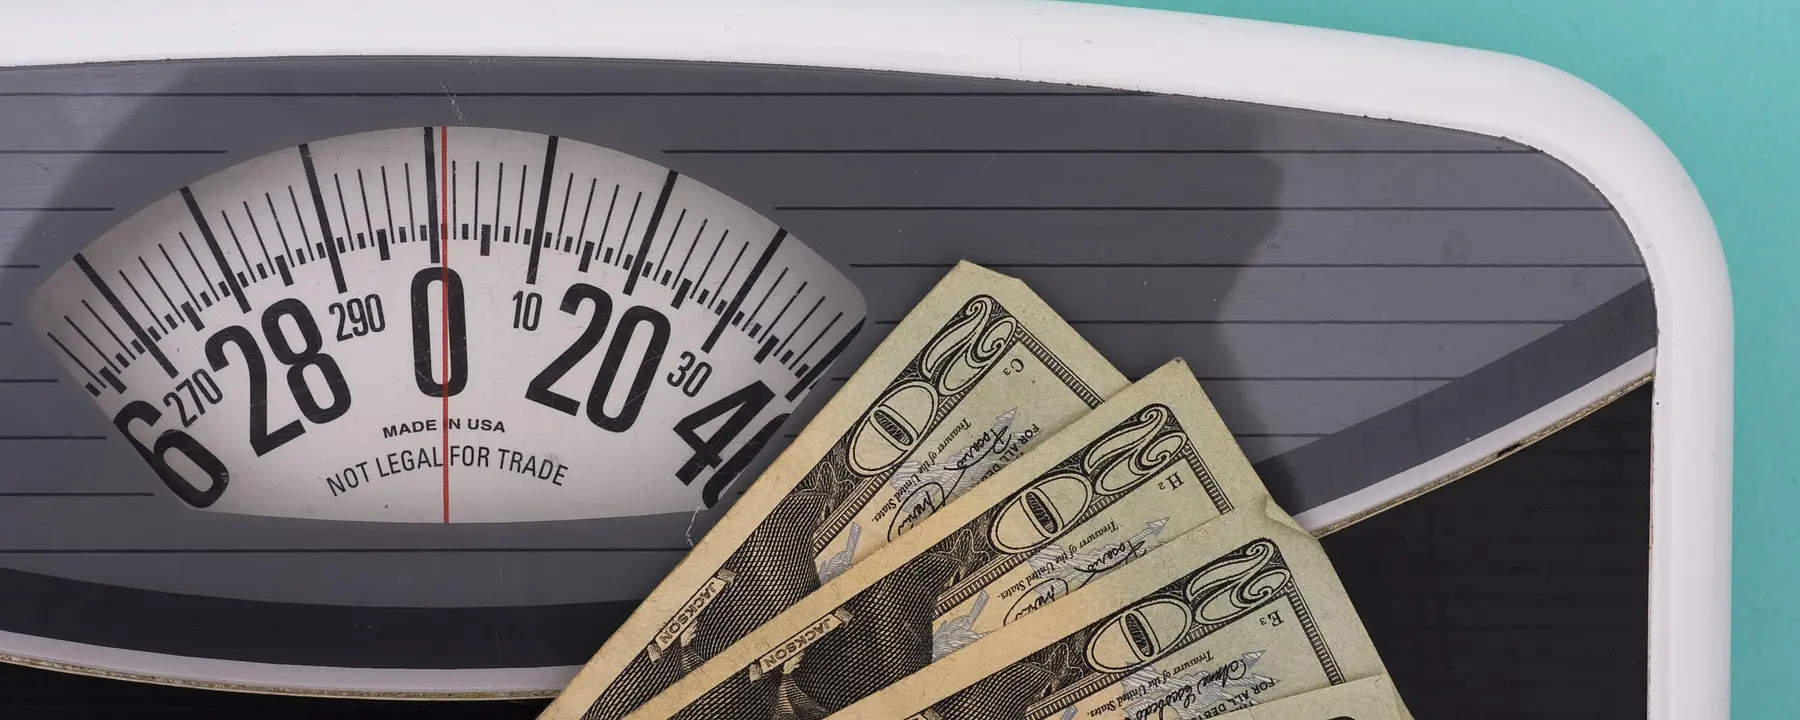 A scale for measuring weight and dollars